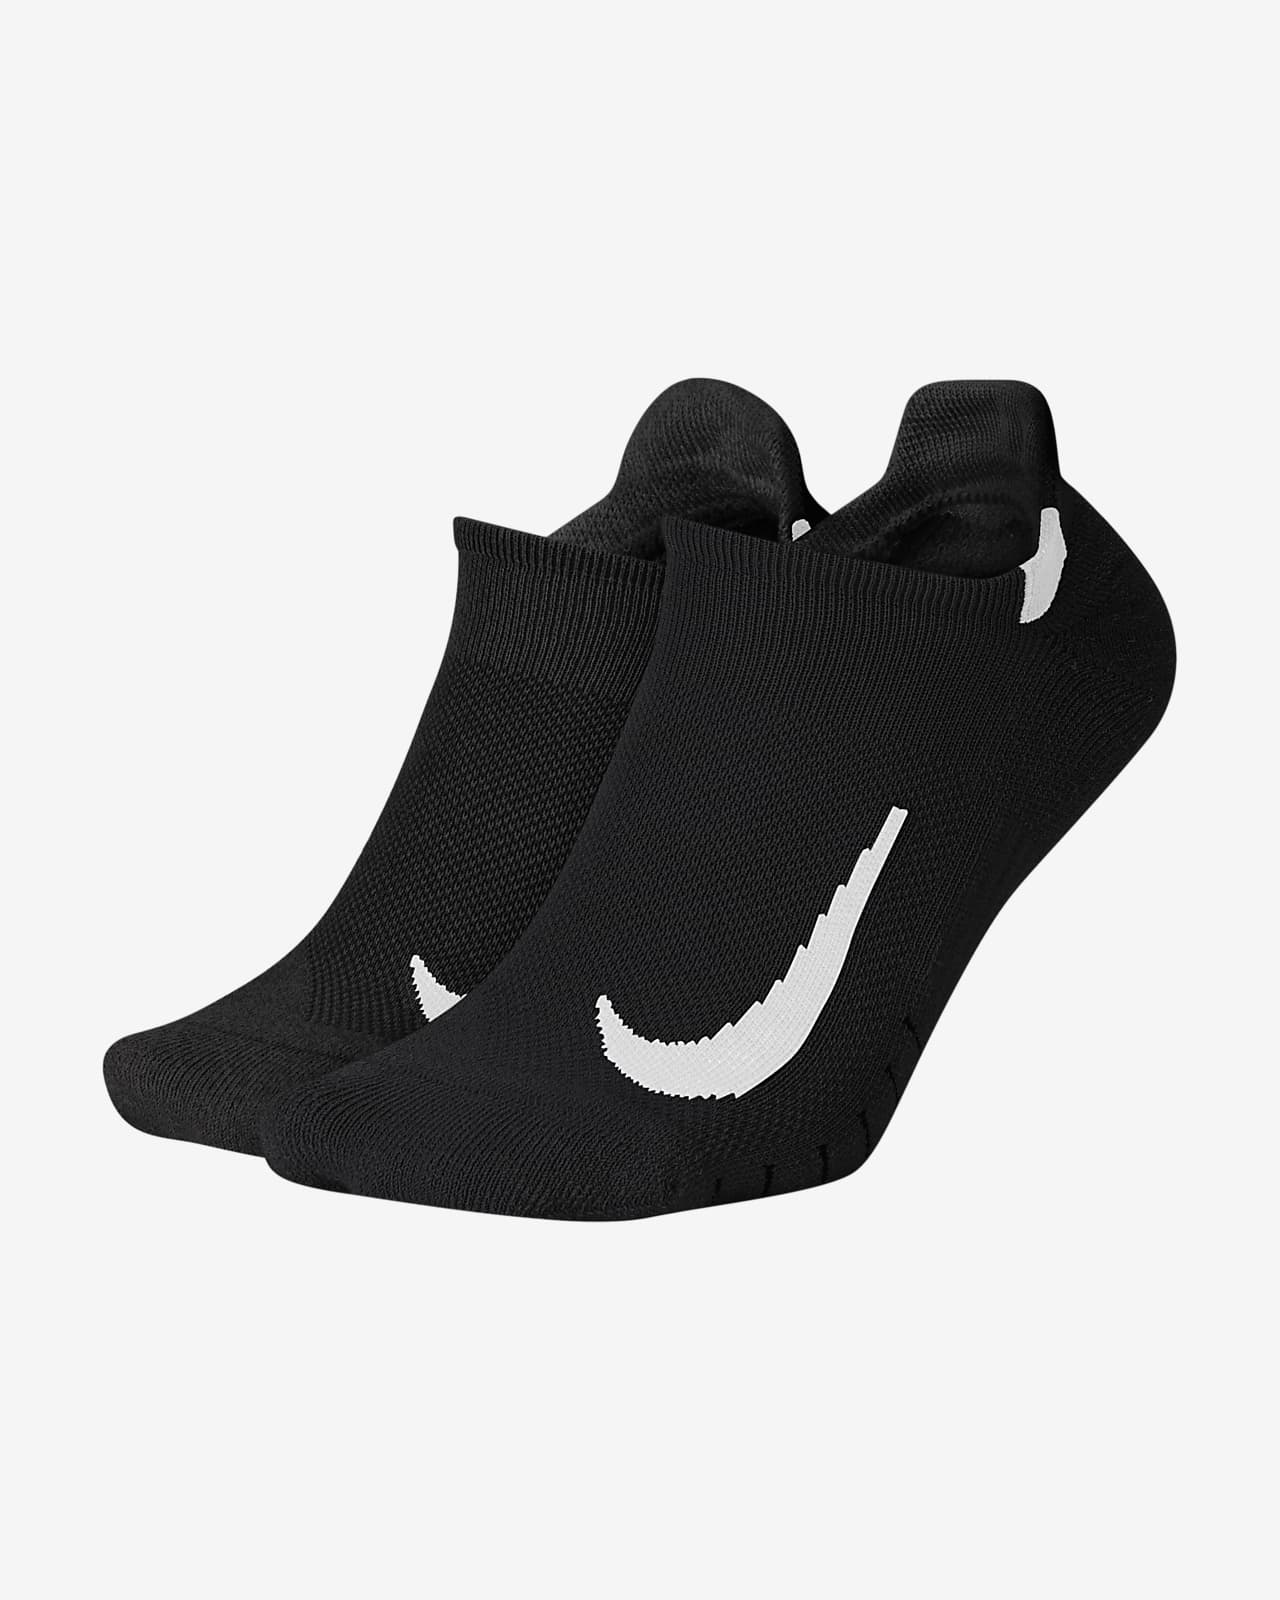 Chaussettes de running invisibles Nike Multiplier (2 paires)